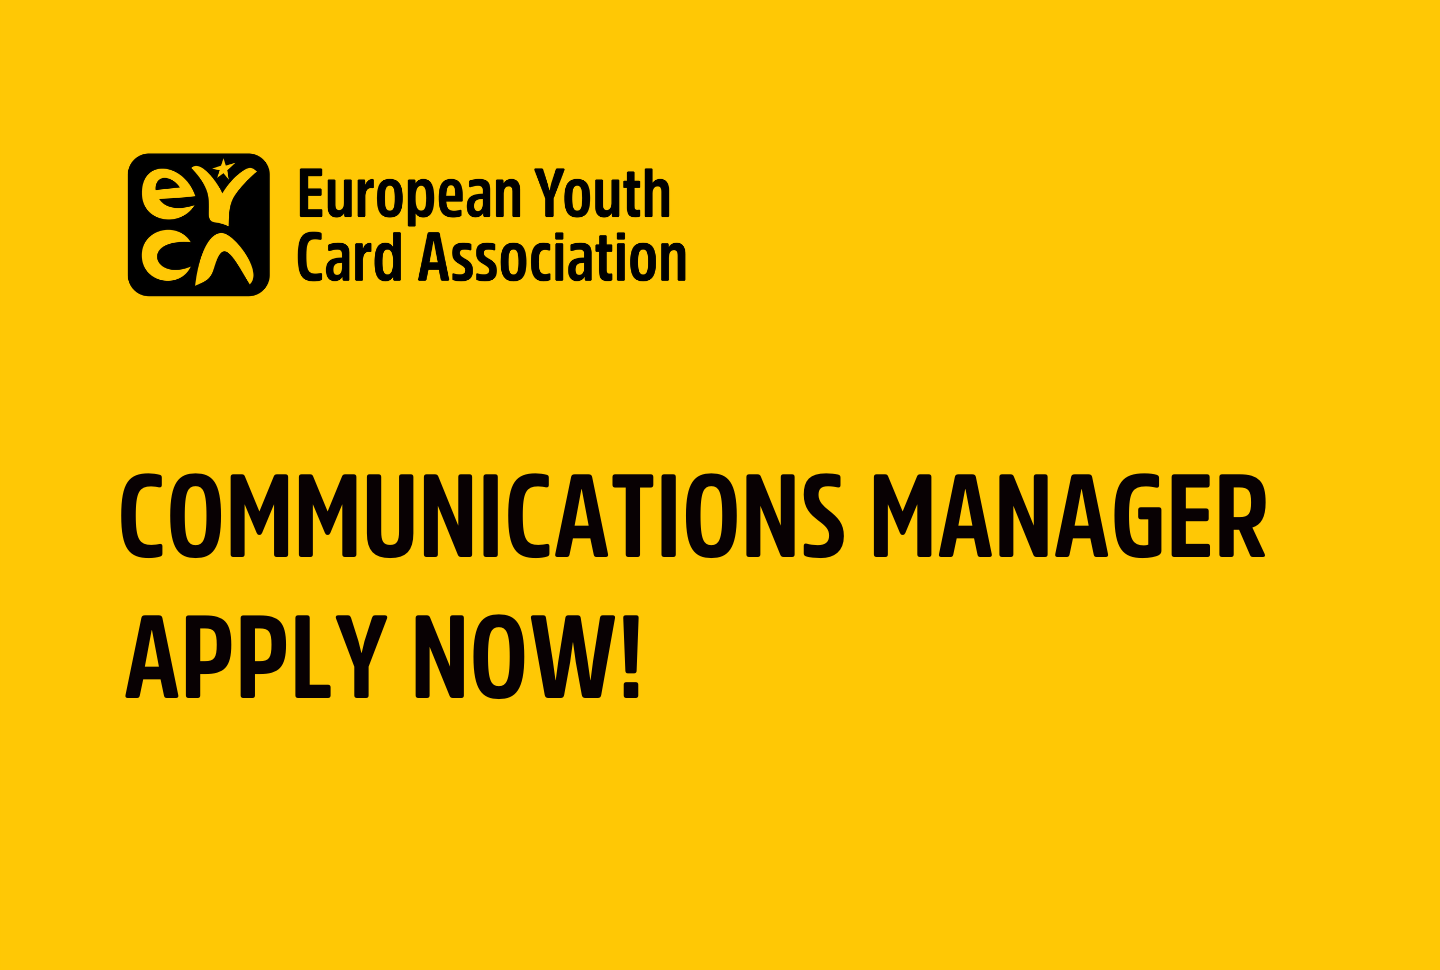 We're hiring!! Communications Manager position open in the EYCA Brussels office